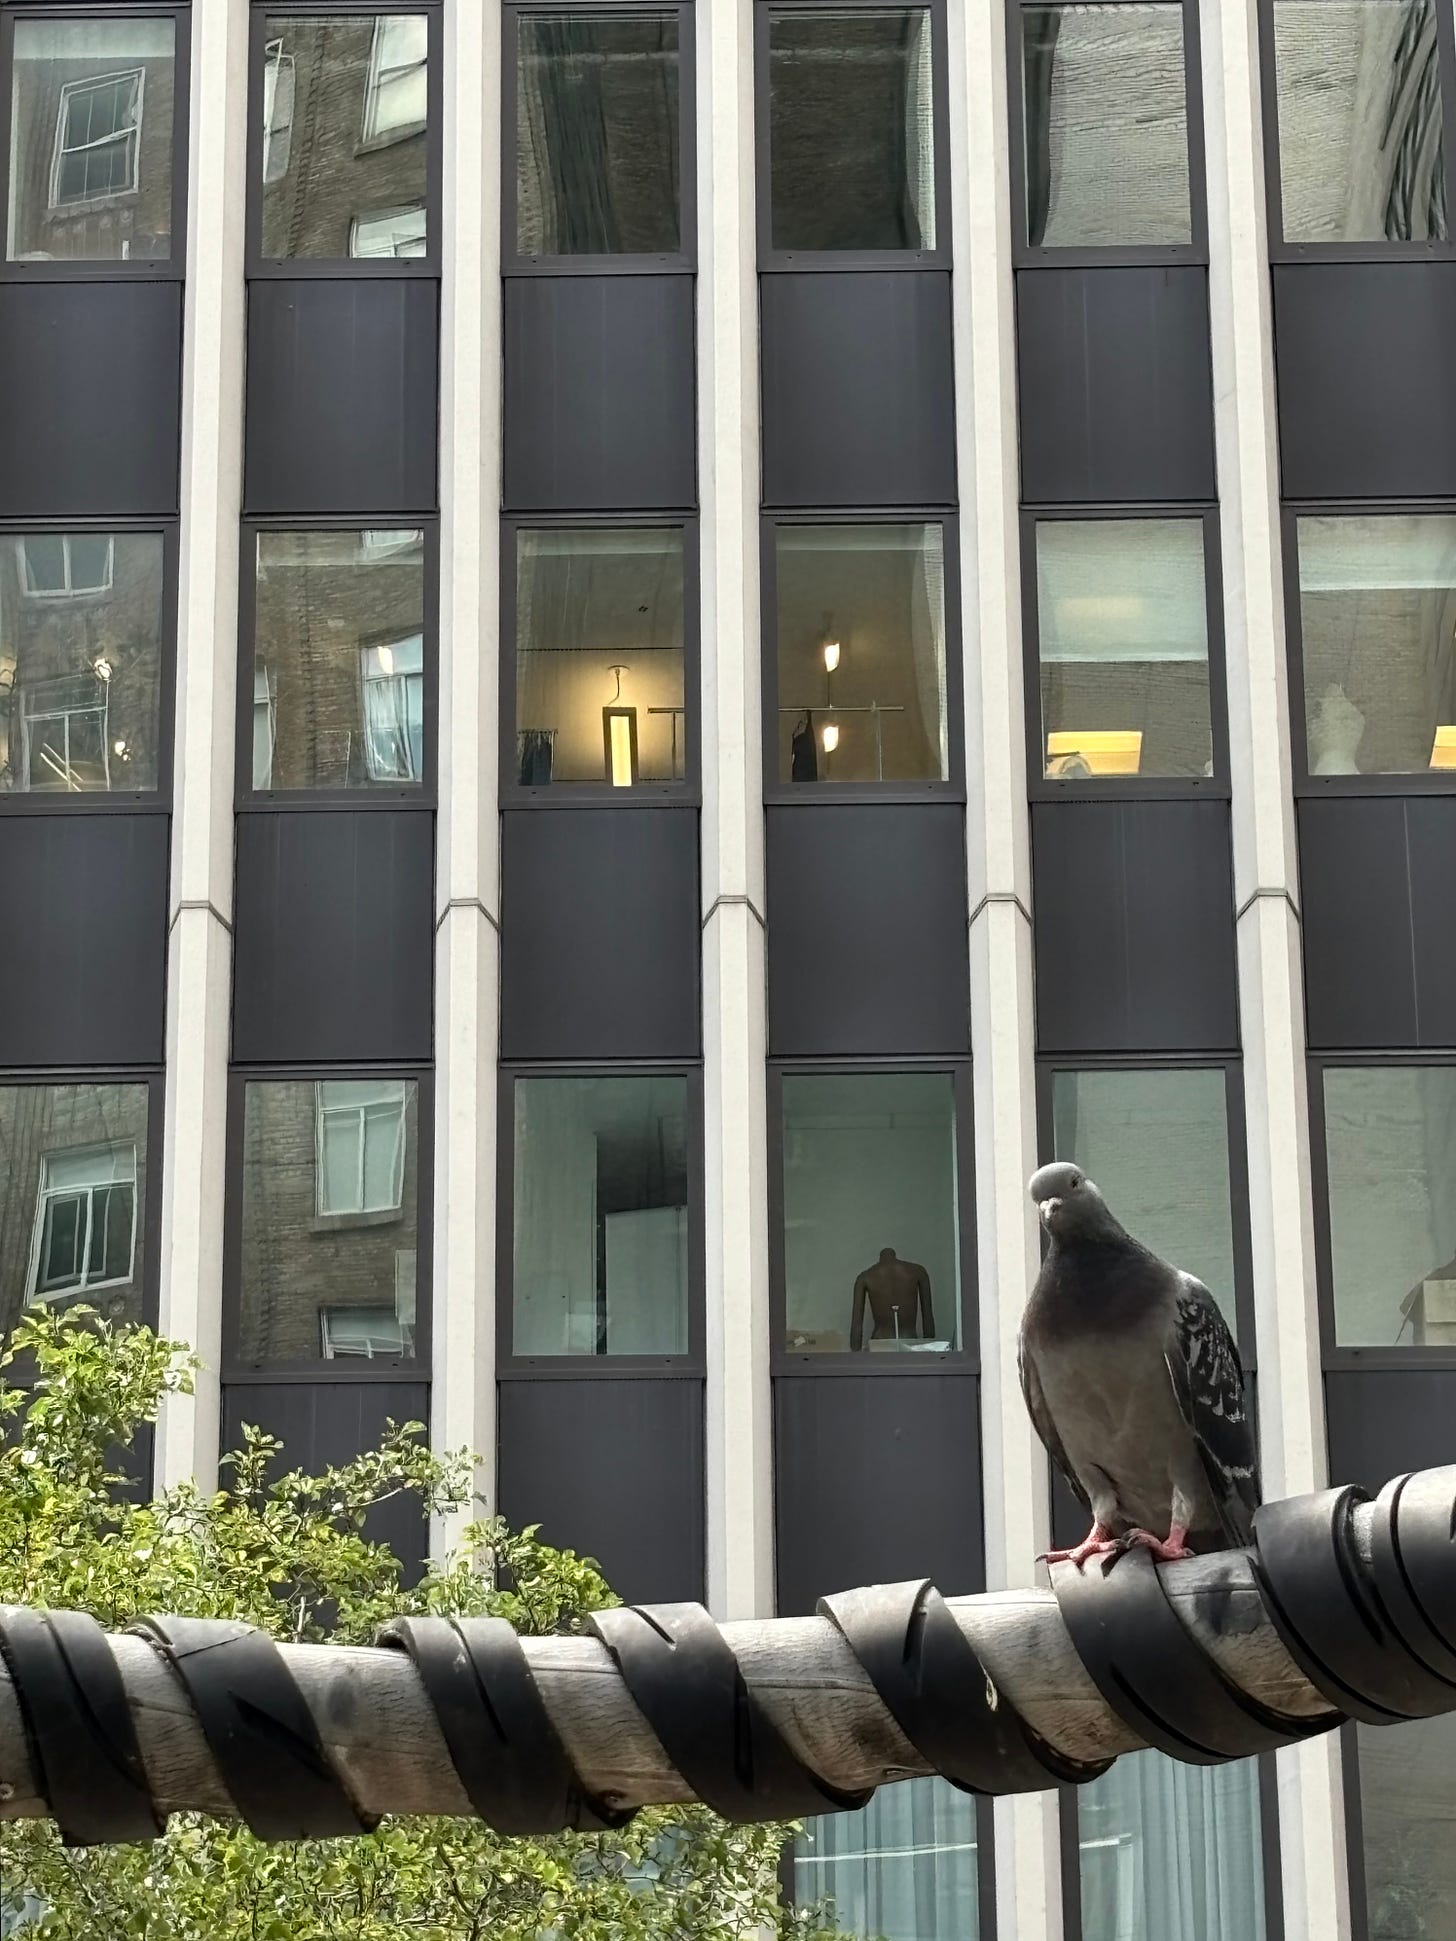 A quizzical pigeon in front of a wall of windows.